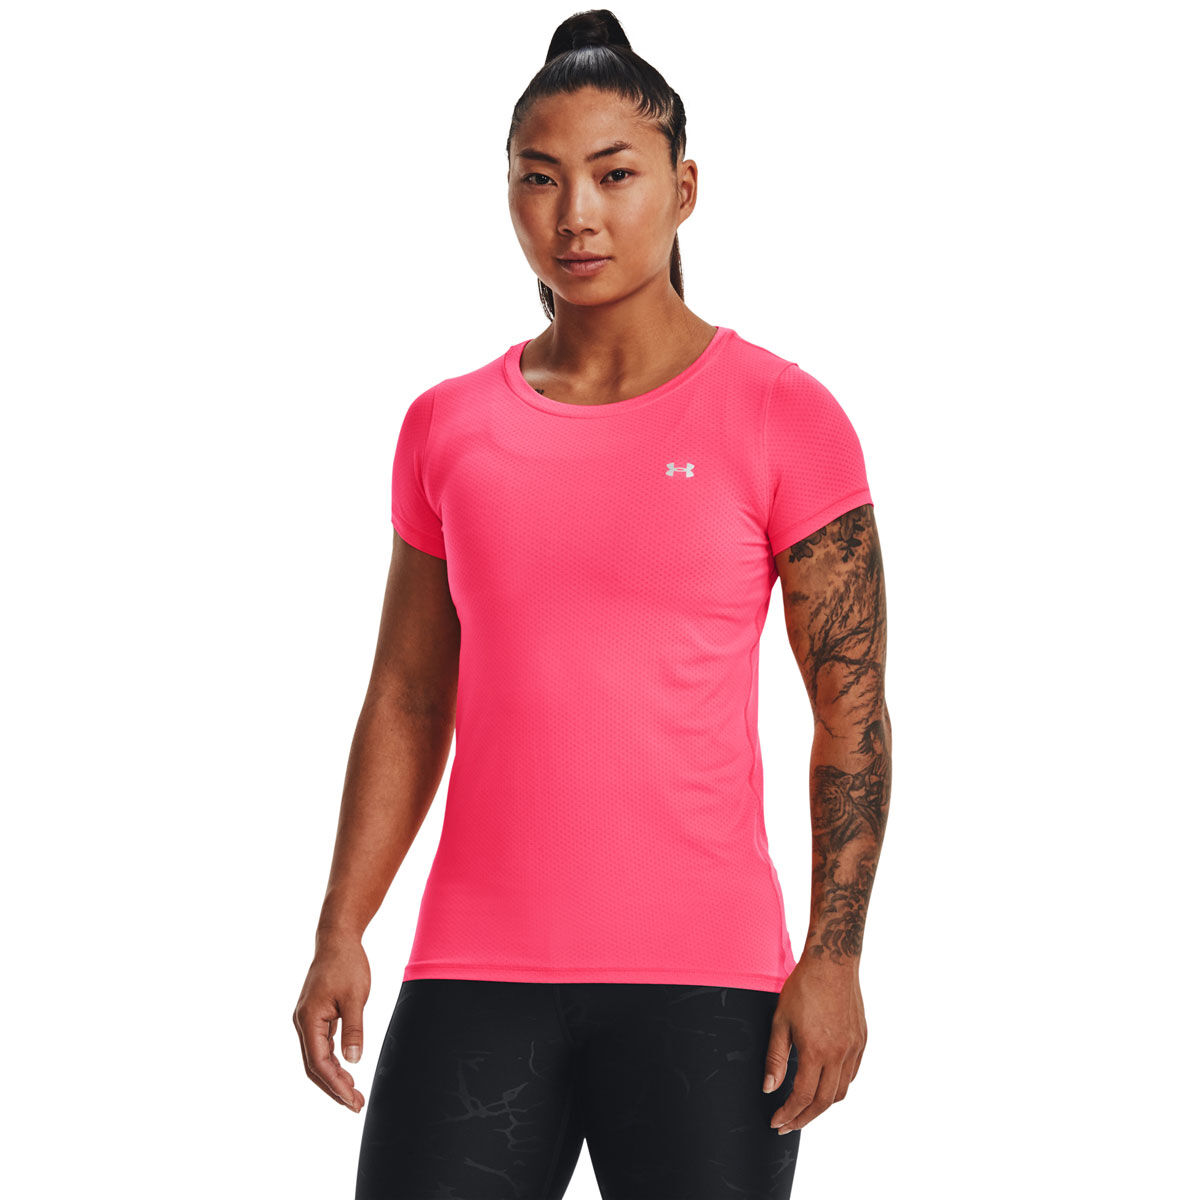 Under Armour Training heatgear booty shorts in pink